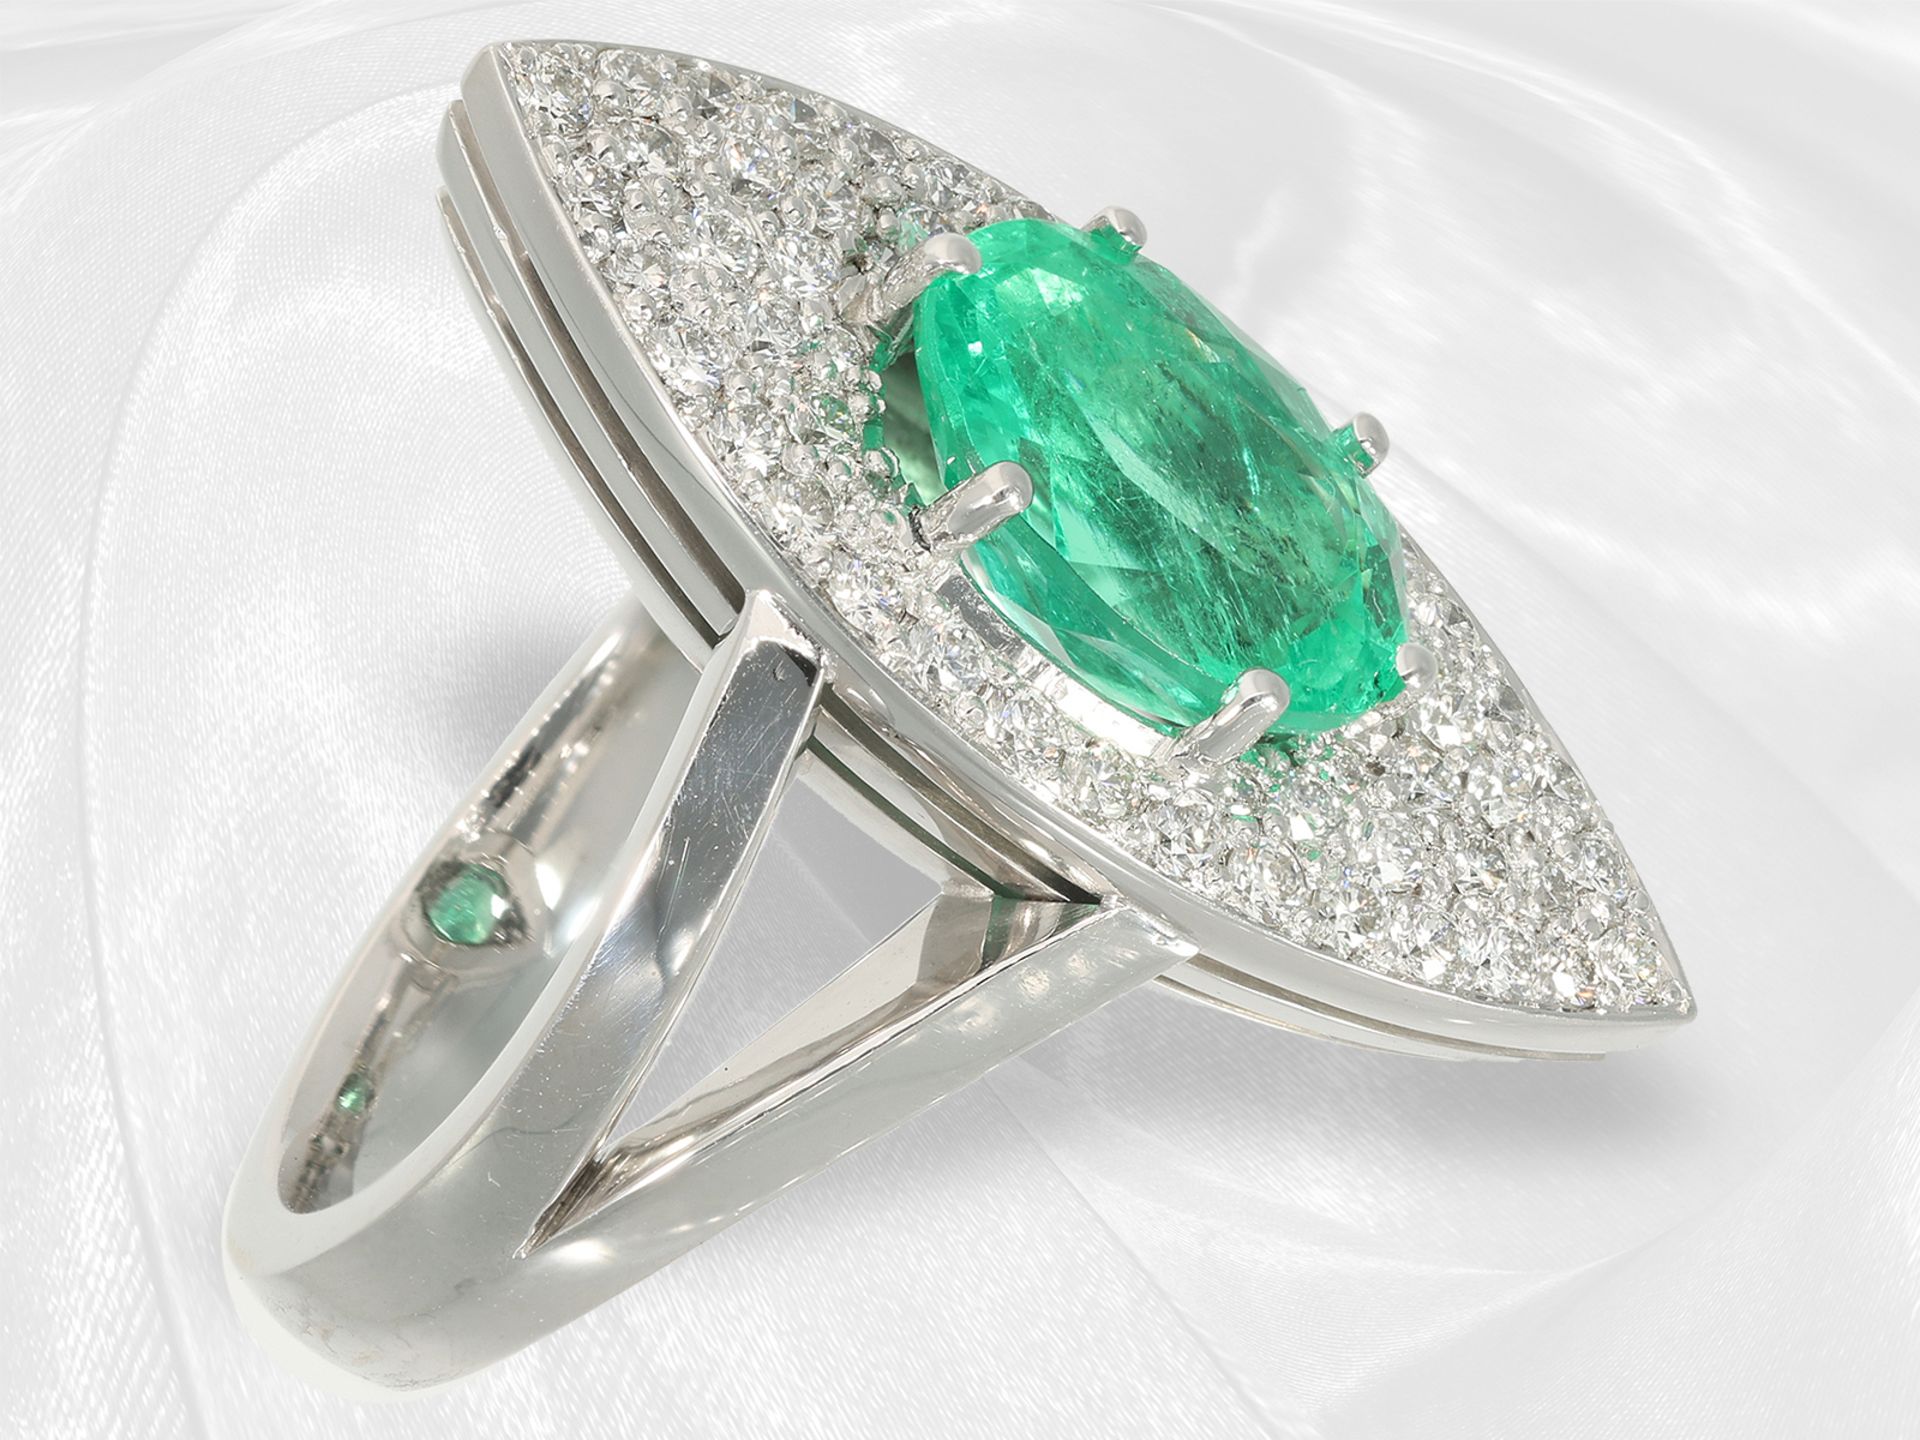 Formerly very expensive emerald/brilliant-cut diamond goldsmith ring with Colombian top quality emer - Image 2 of 7